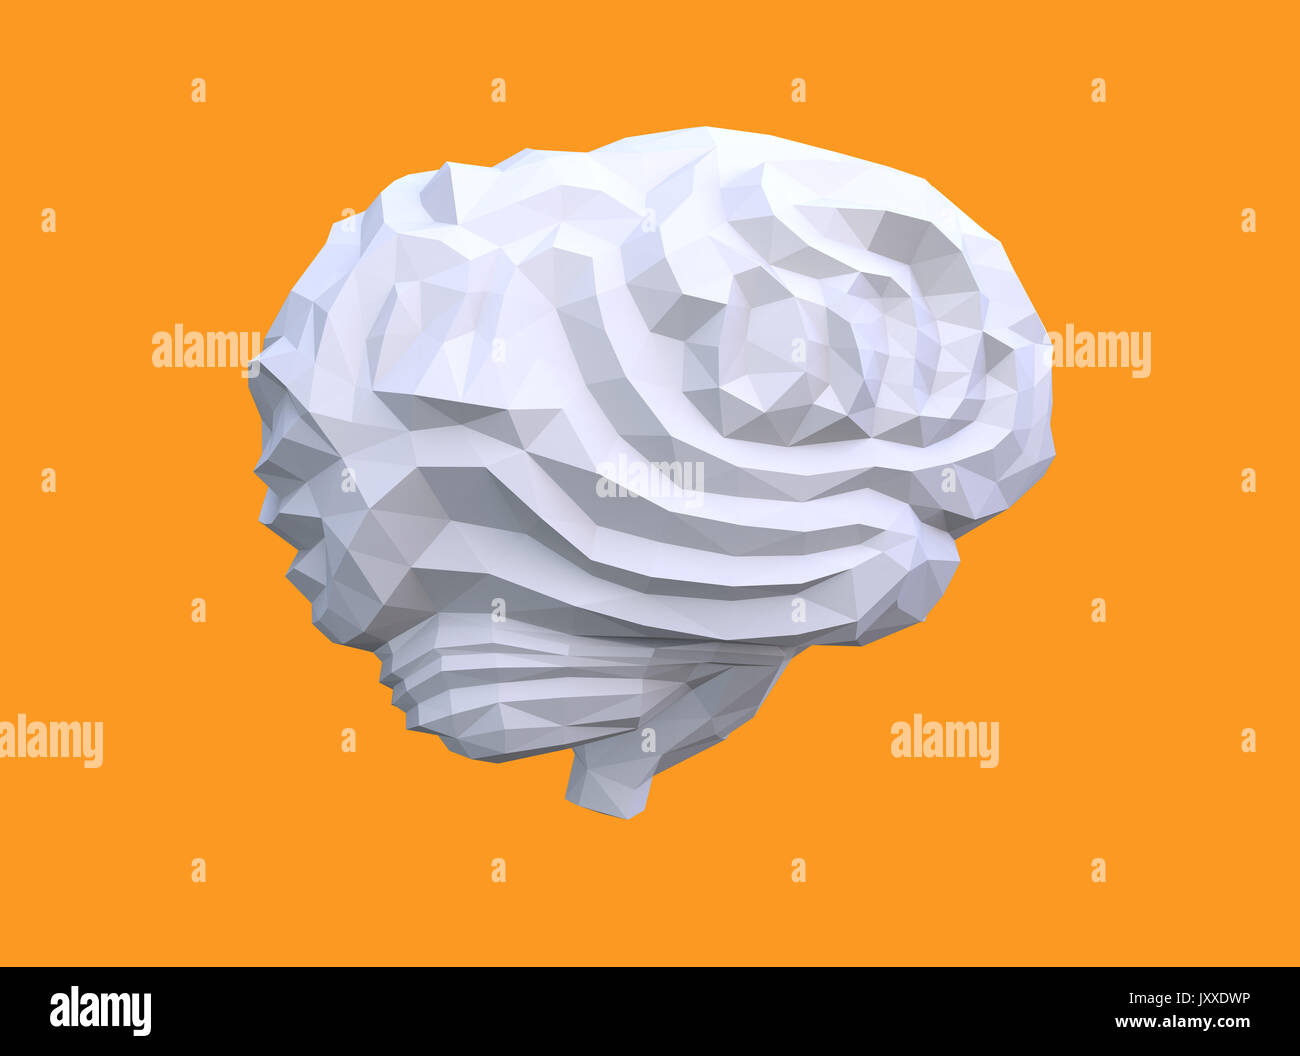 Side view of low poly brain model. Concept for artificial intelligence. 3D rendering image. Stock Photo